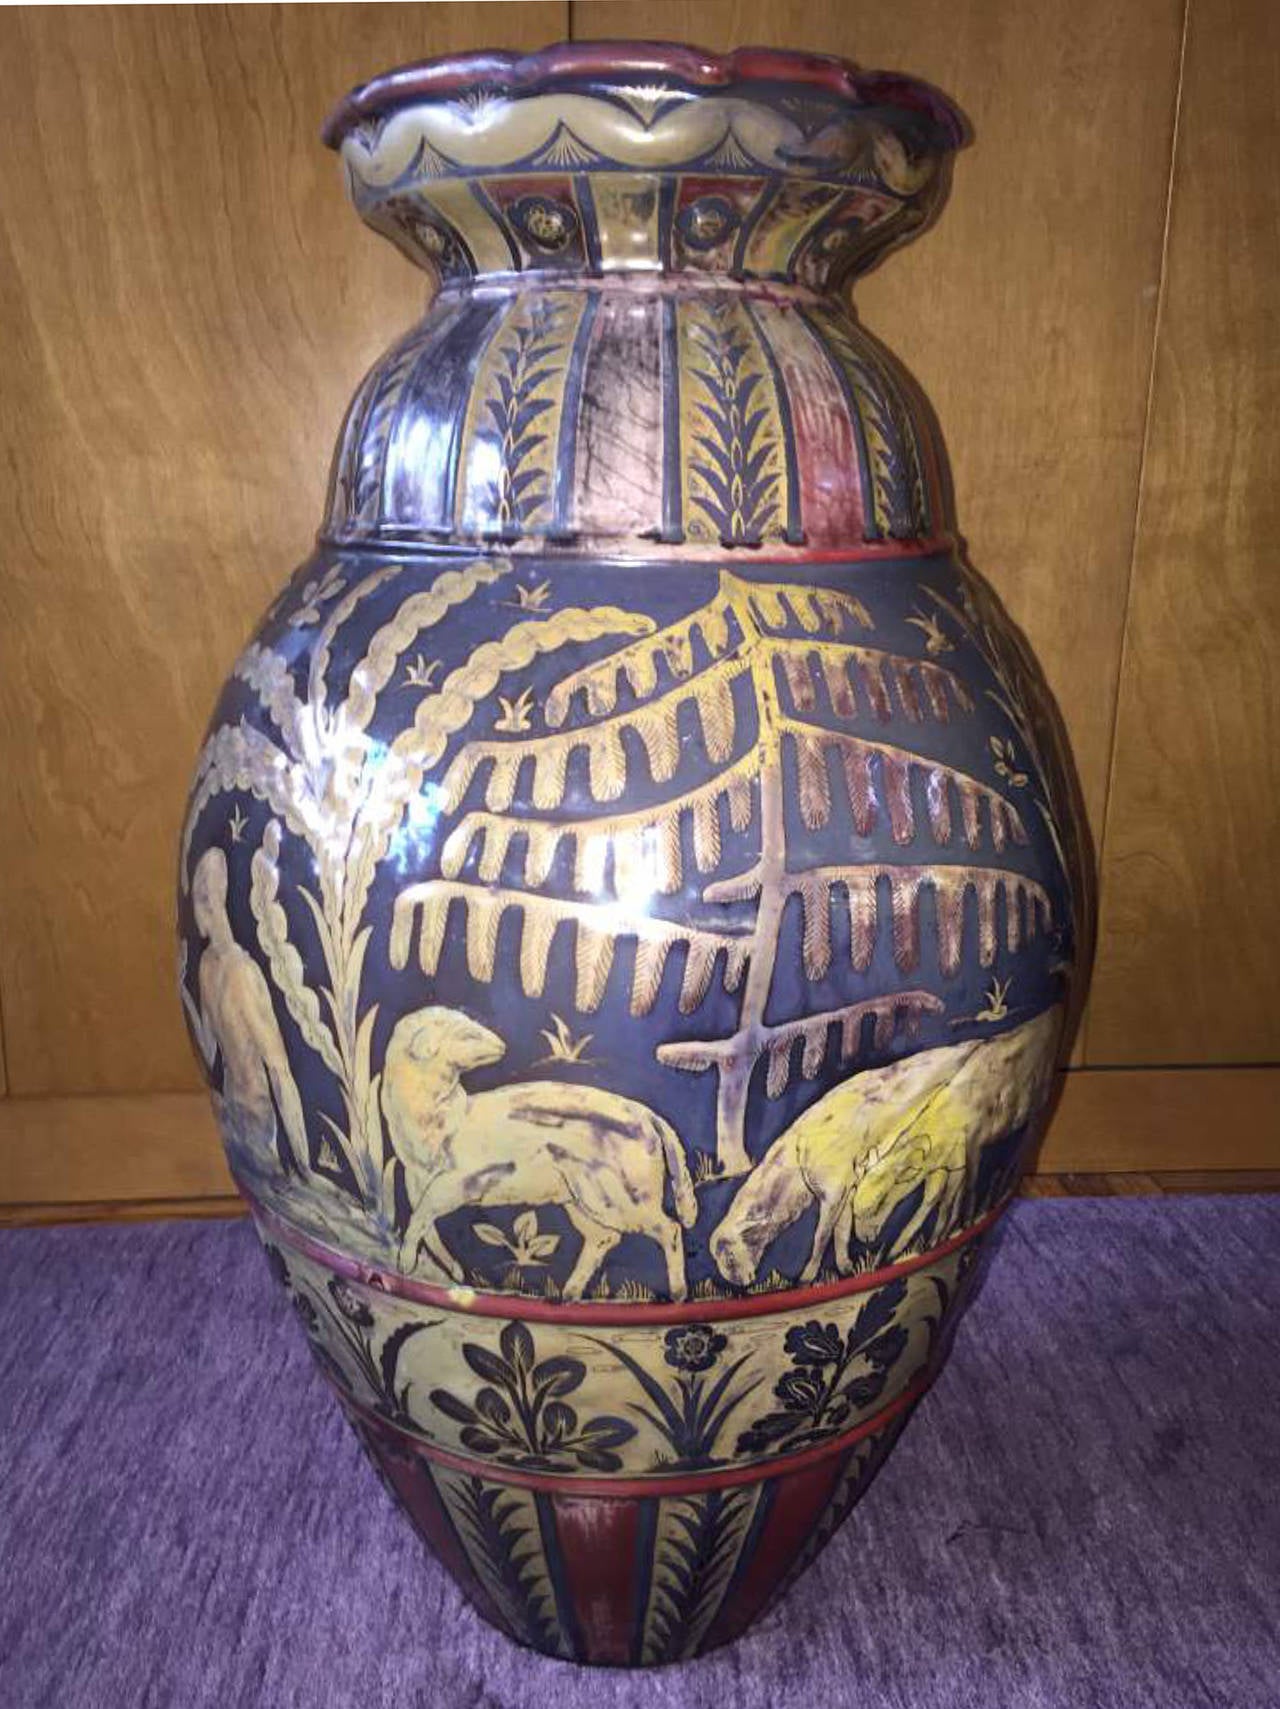 Monumental example, likely done for exhibition, with art deco figures, animals, and flora and fauna. Vase by Cantagalli circa; 1920’s to 1930's.
Approximately 26 inches high x 18 inches wide. Cantagalli's work is in such museums as the Victoria &